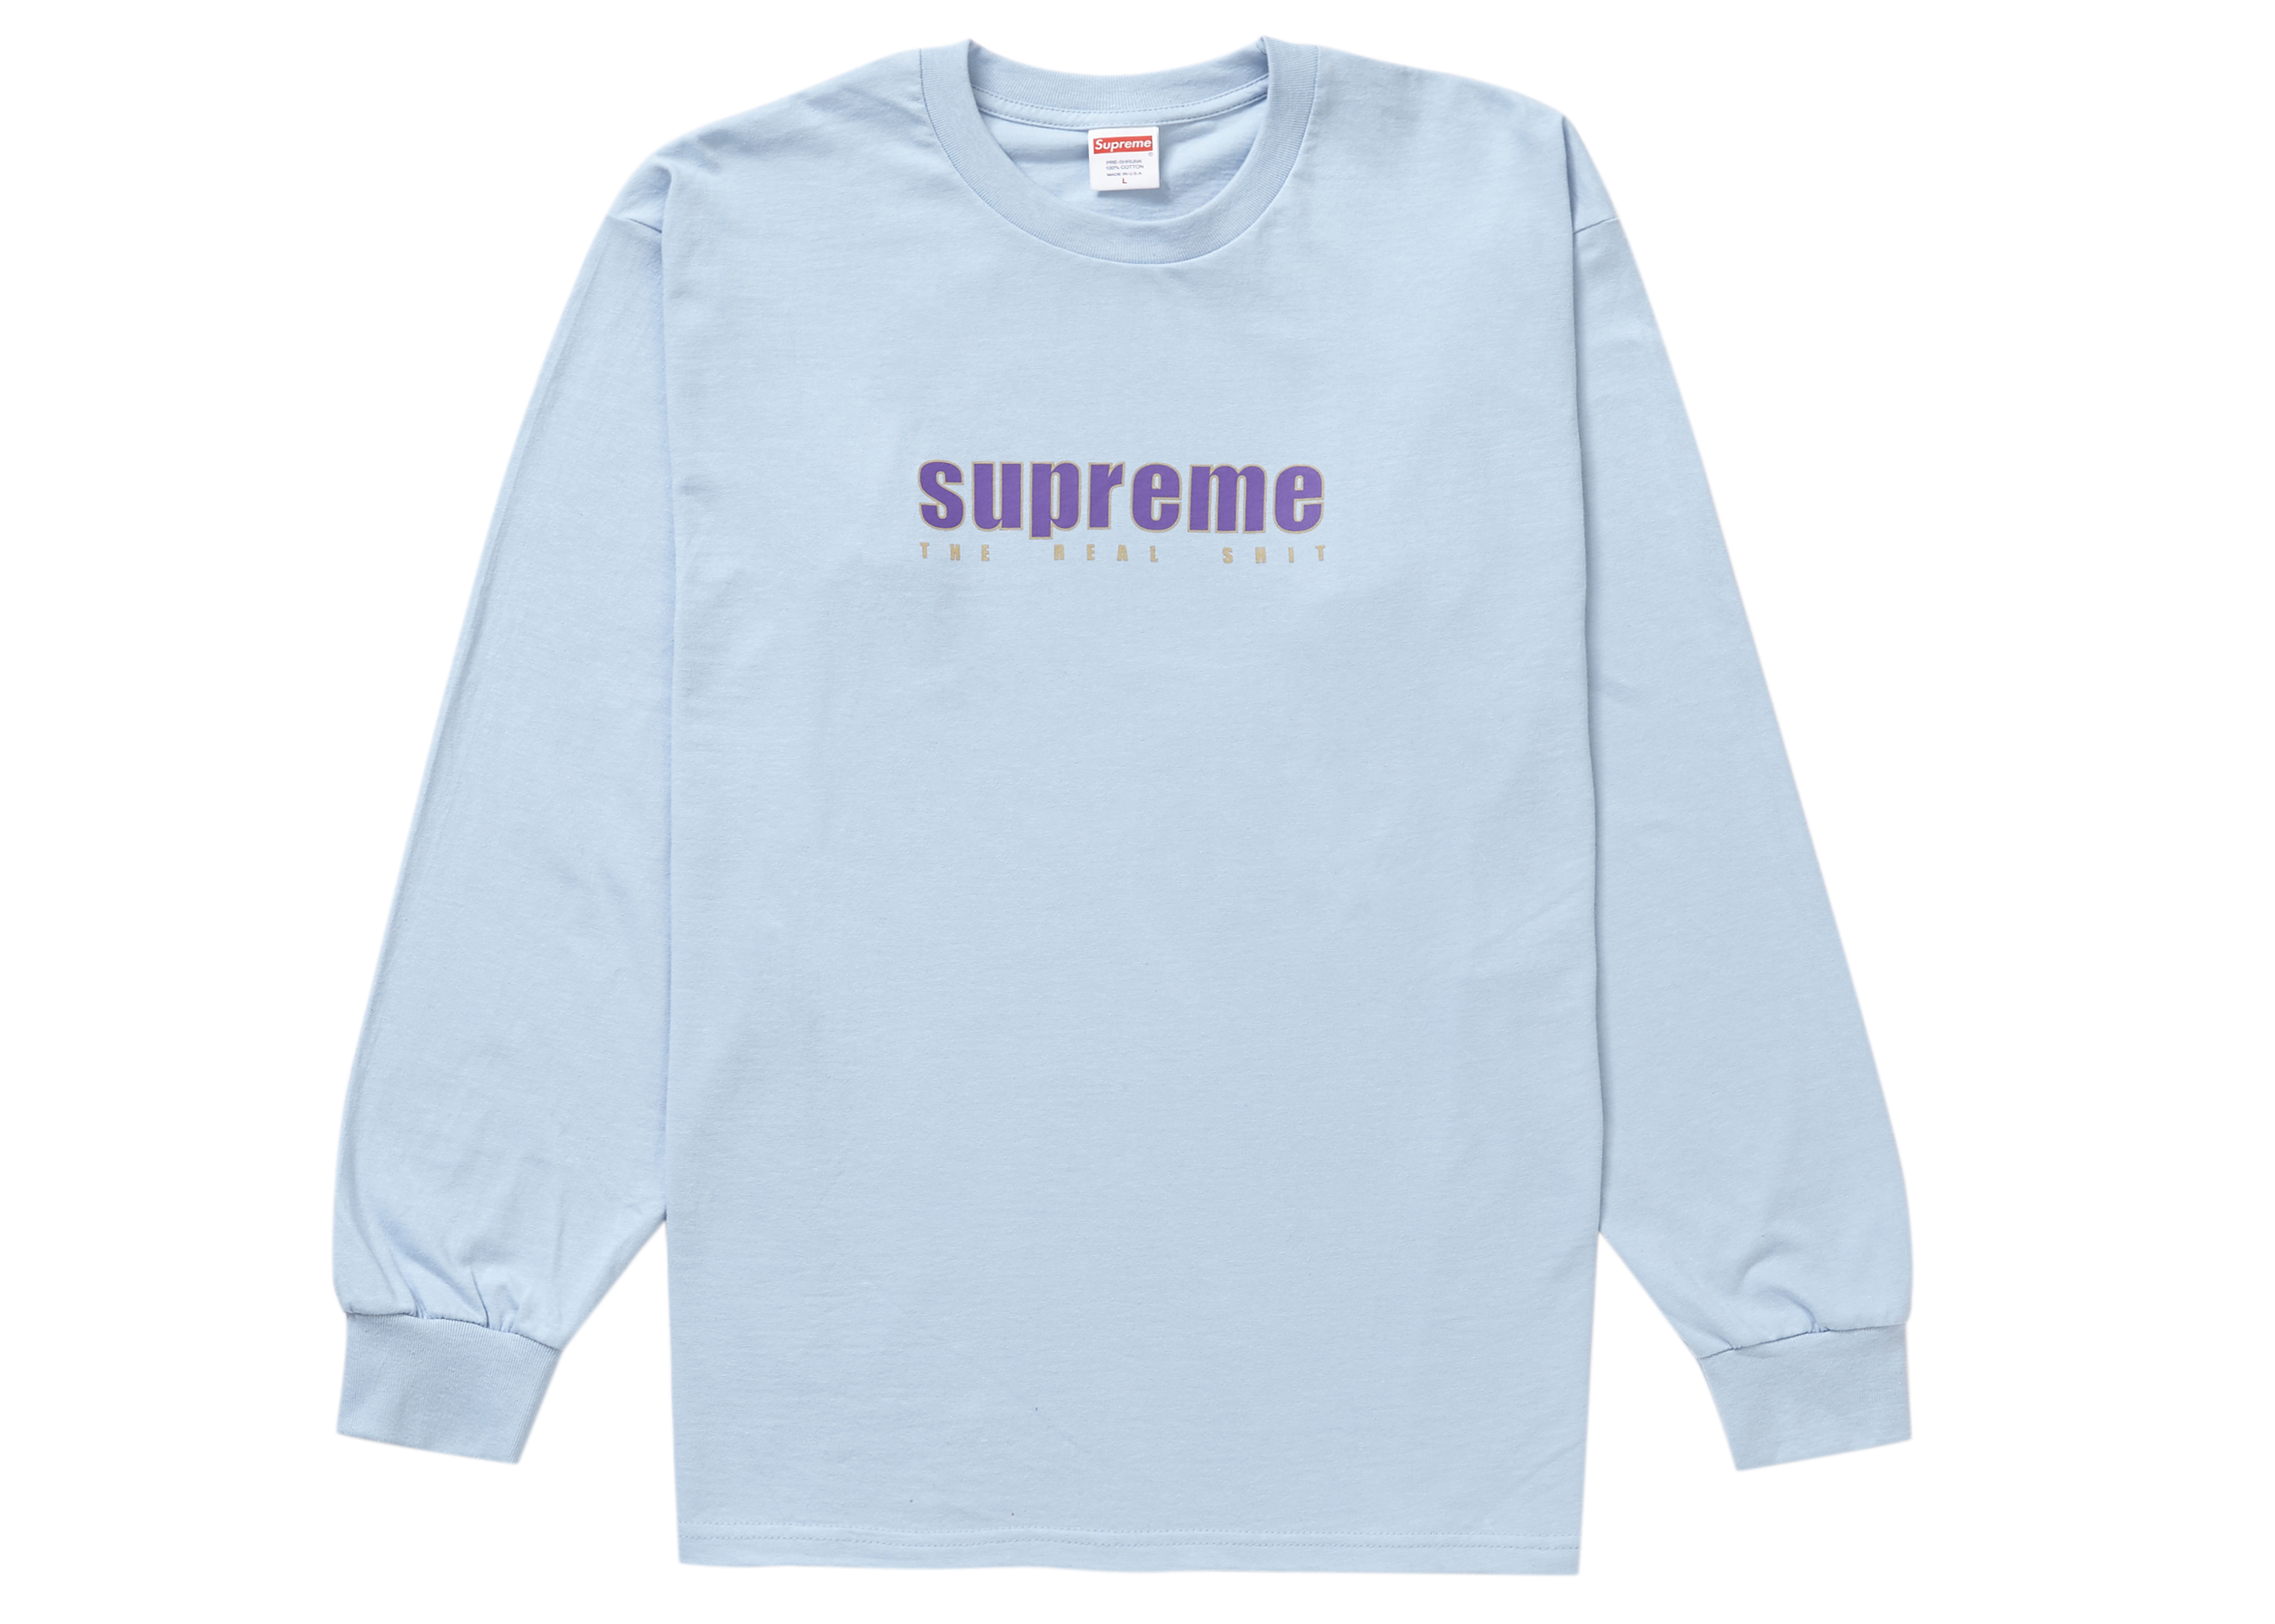 Supreme The Real Shit L/S Tee Light Blue - SS19